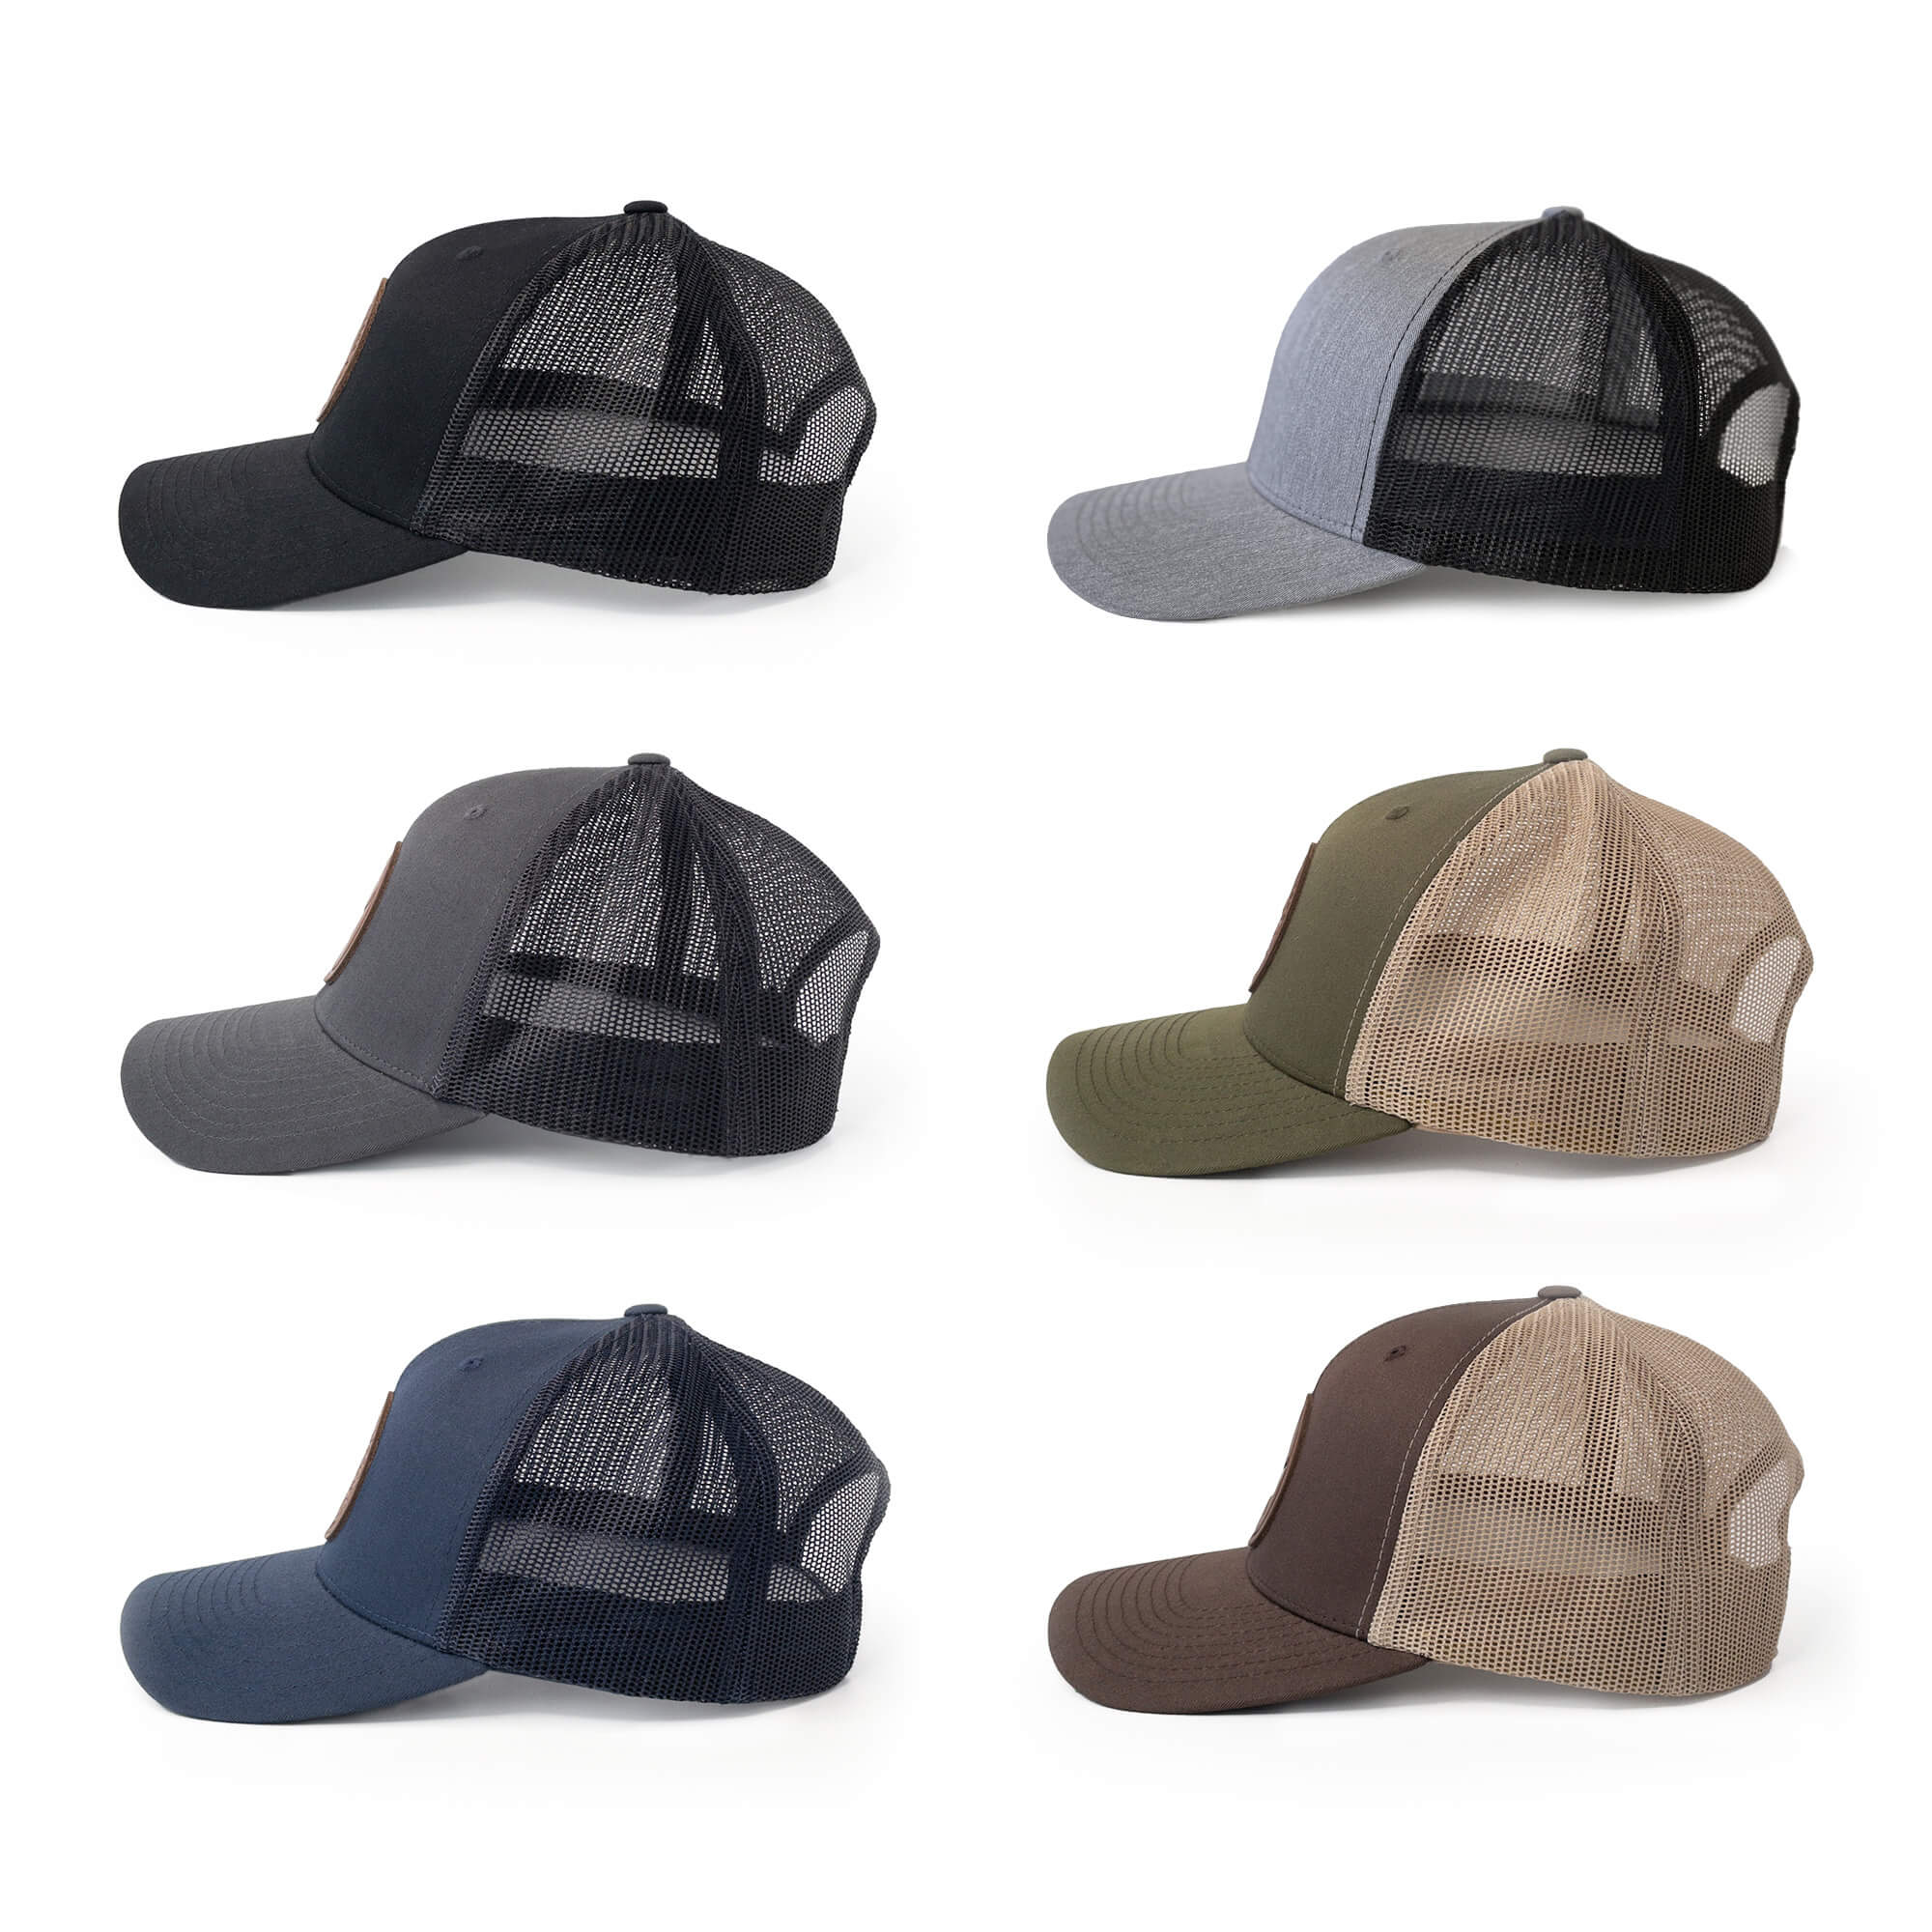 Leather patch trucker hats available in 6 colors | BLACK-002-002, CHARC-002-002, NAVY-002-002, HGREY-002-002, MOSS-002-002, BROWN-002-002